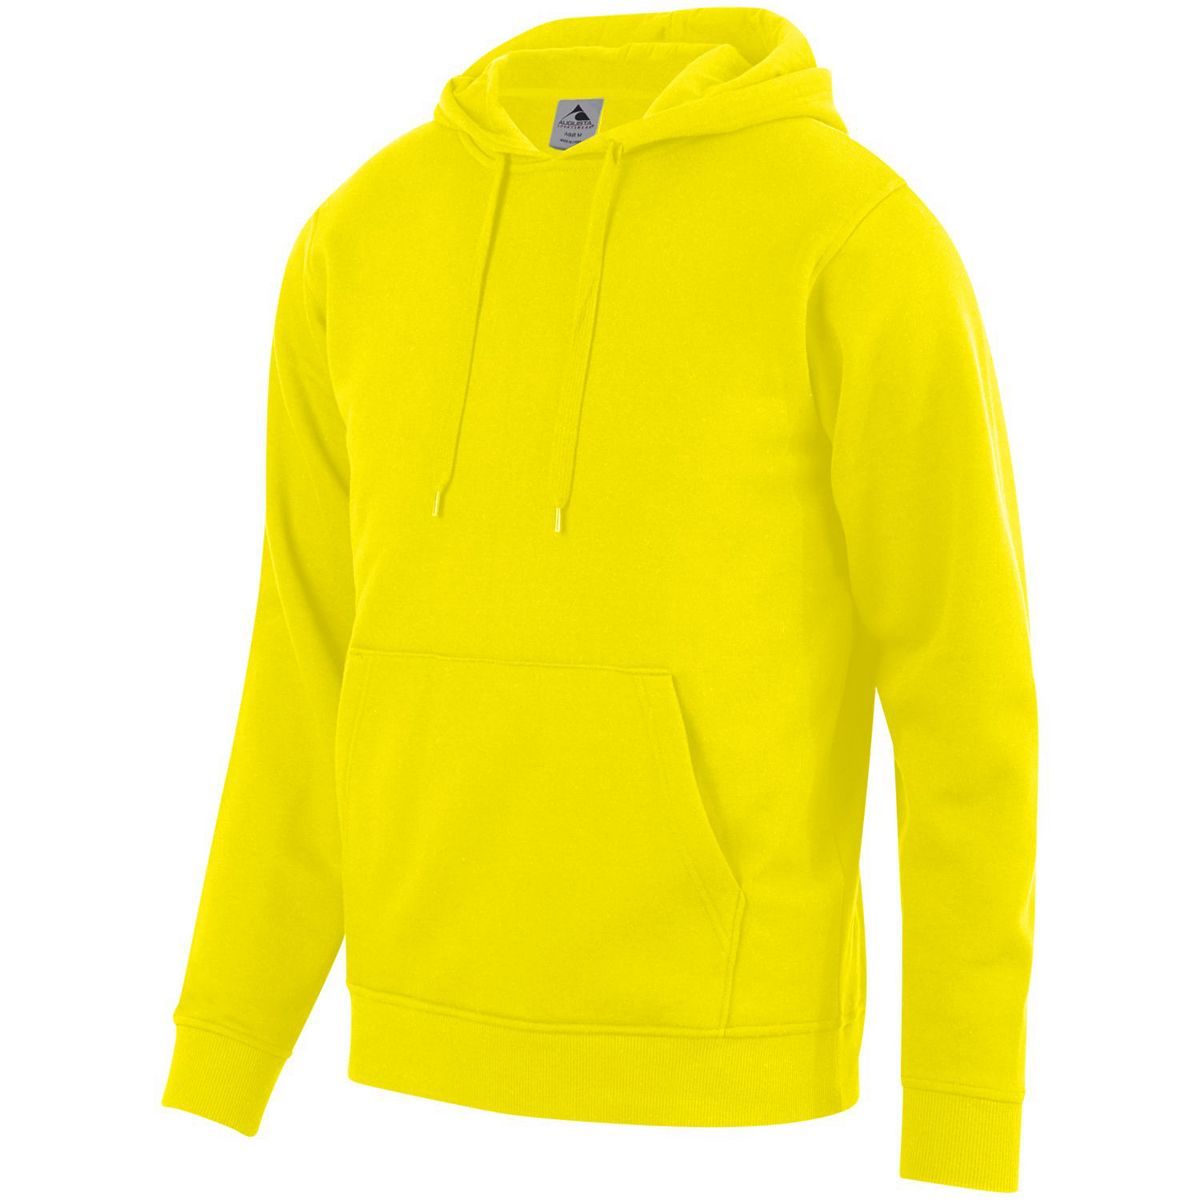 Augusta Sportswear Youth 60/40 Fleece Hoodie in Power Yellow  -Part of the Youth, Youth-Hoodie, Hoodies, Augusta-Products product lines at KanaleyCreations.com